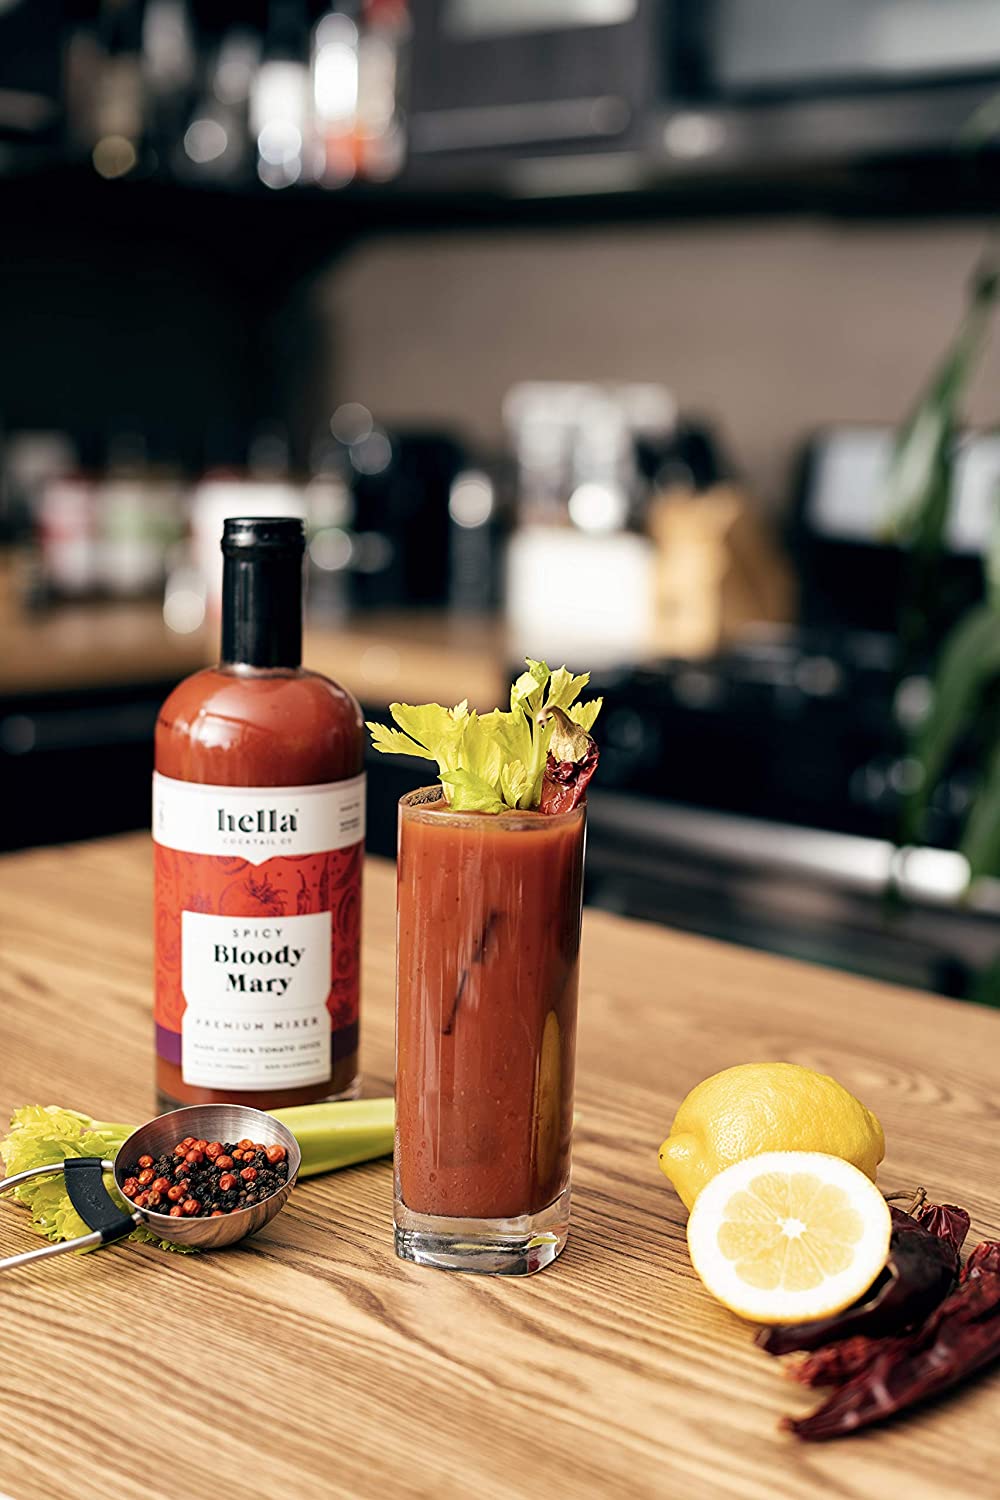 Hella Classic Spicy Bloody Mary Mixer